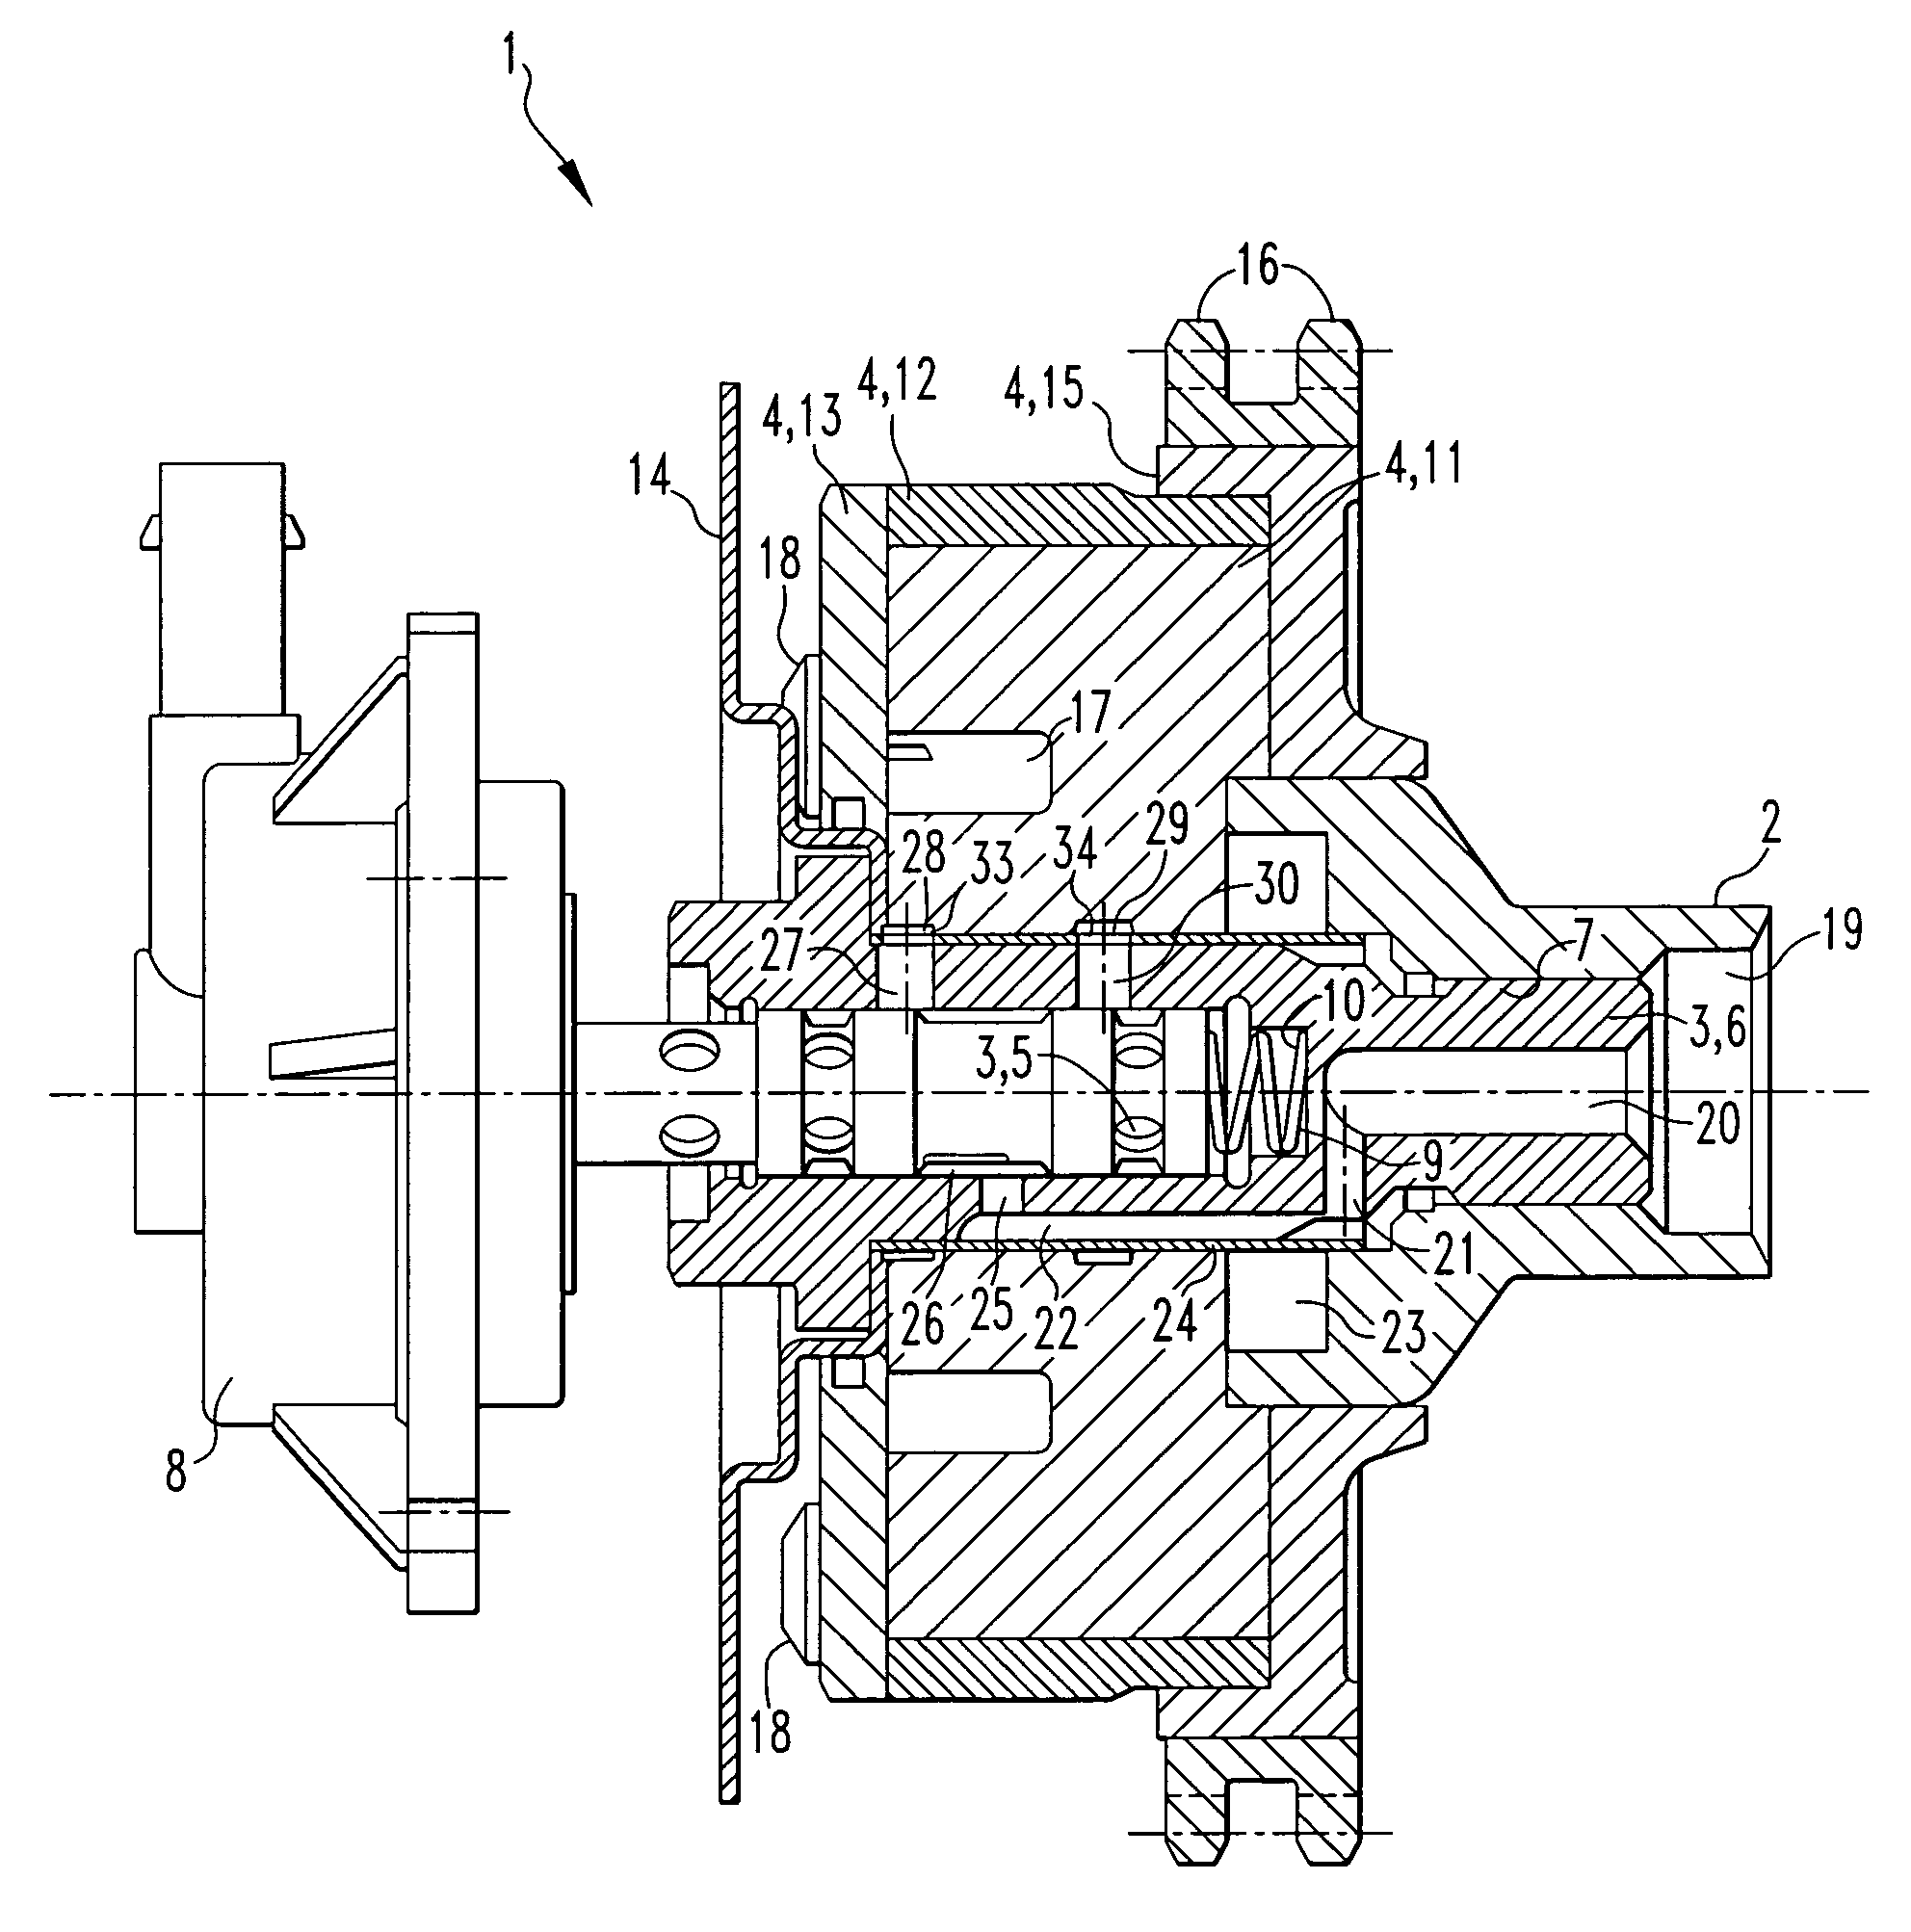 Hydraulic camshaft adjuster for an internal combustion engine